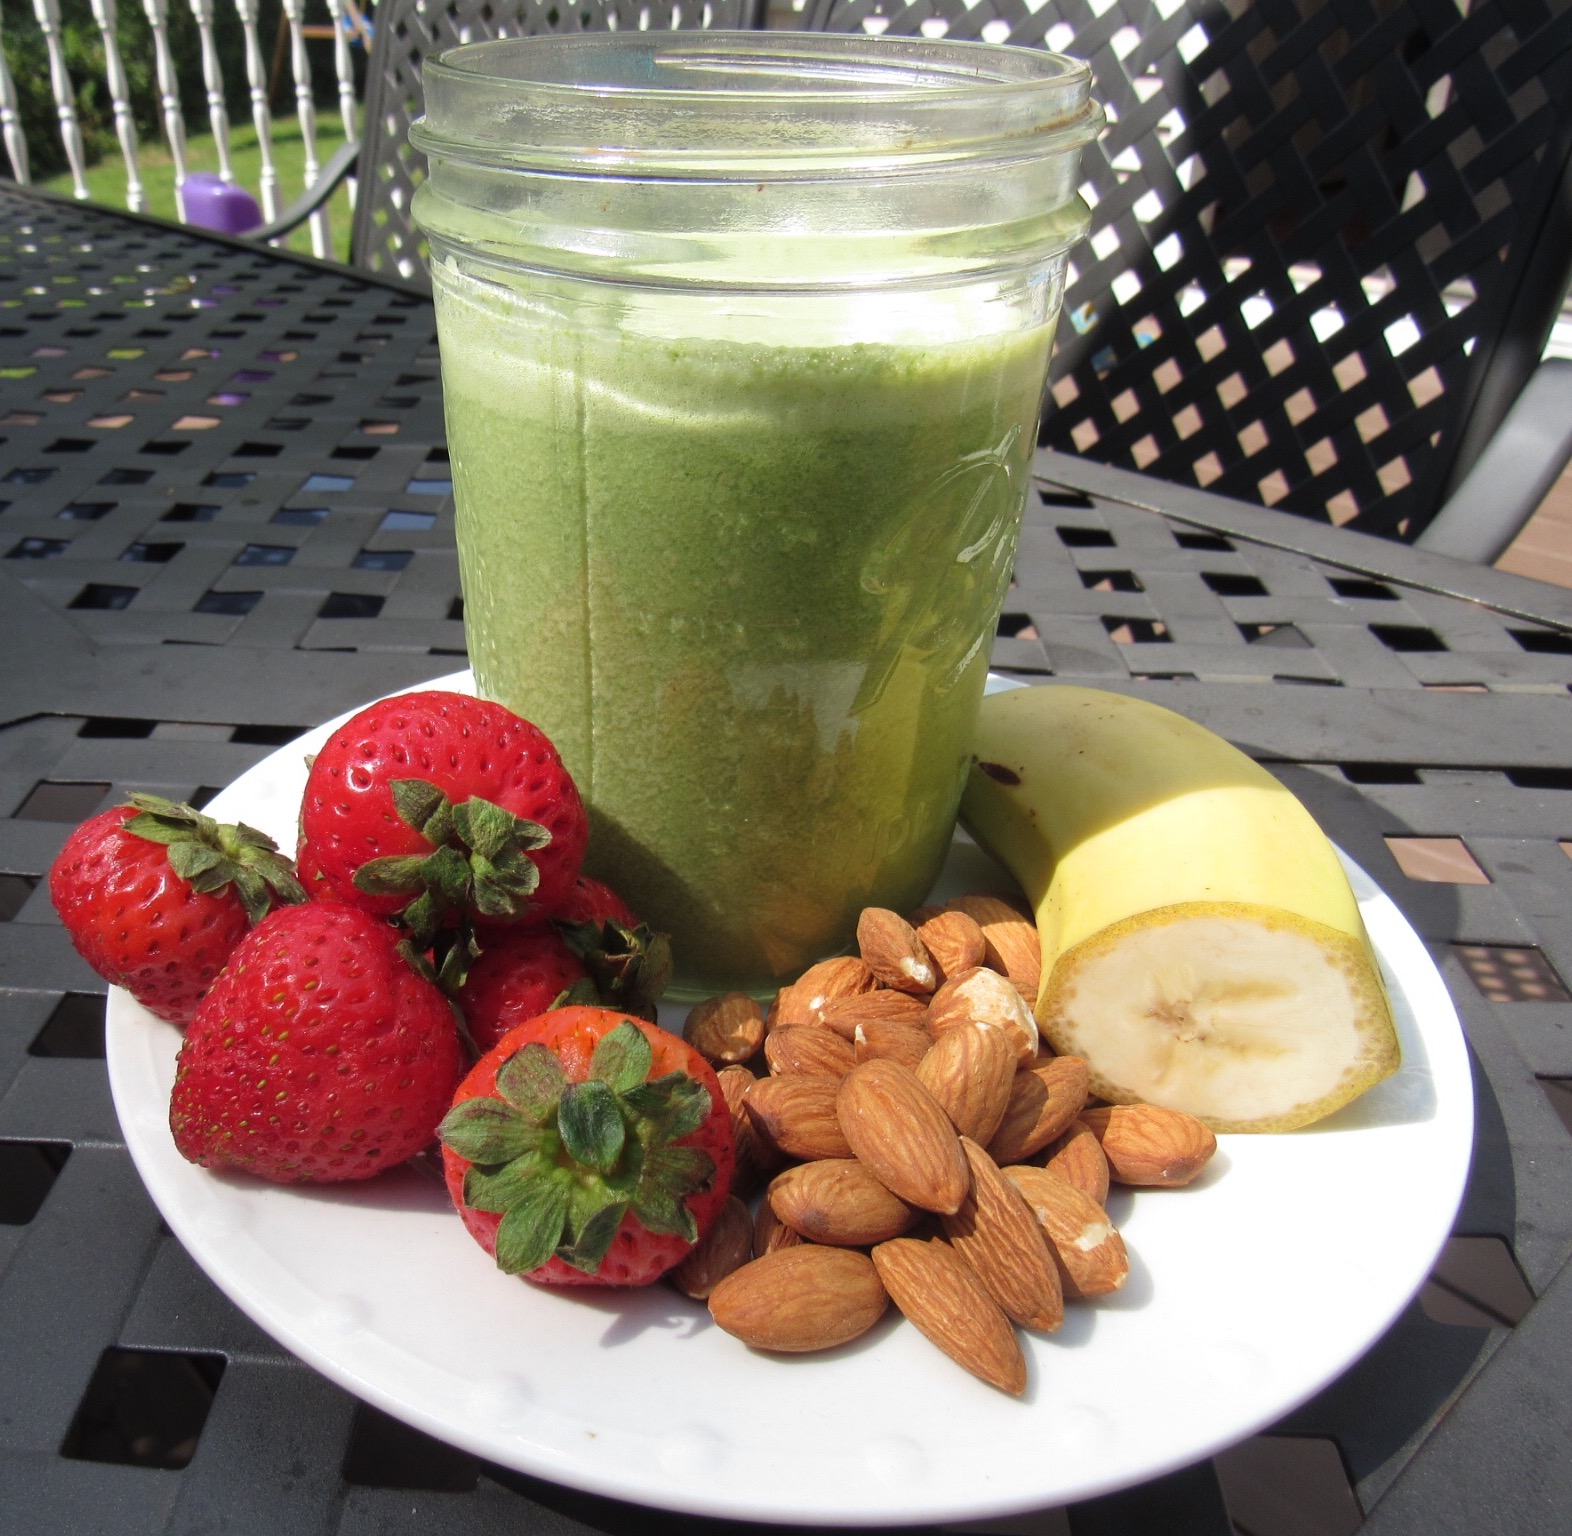 Spinach, Strawberry, Banana and Almond Butter Smoothie